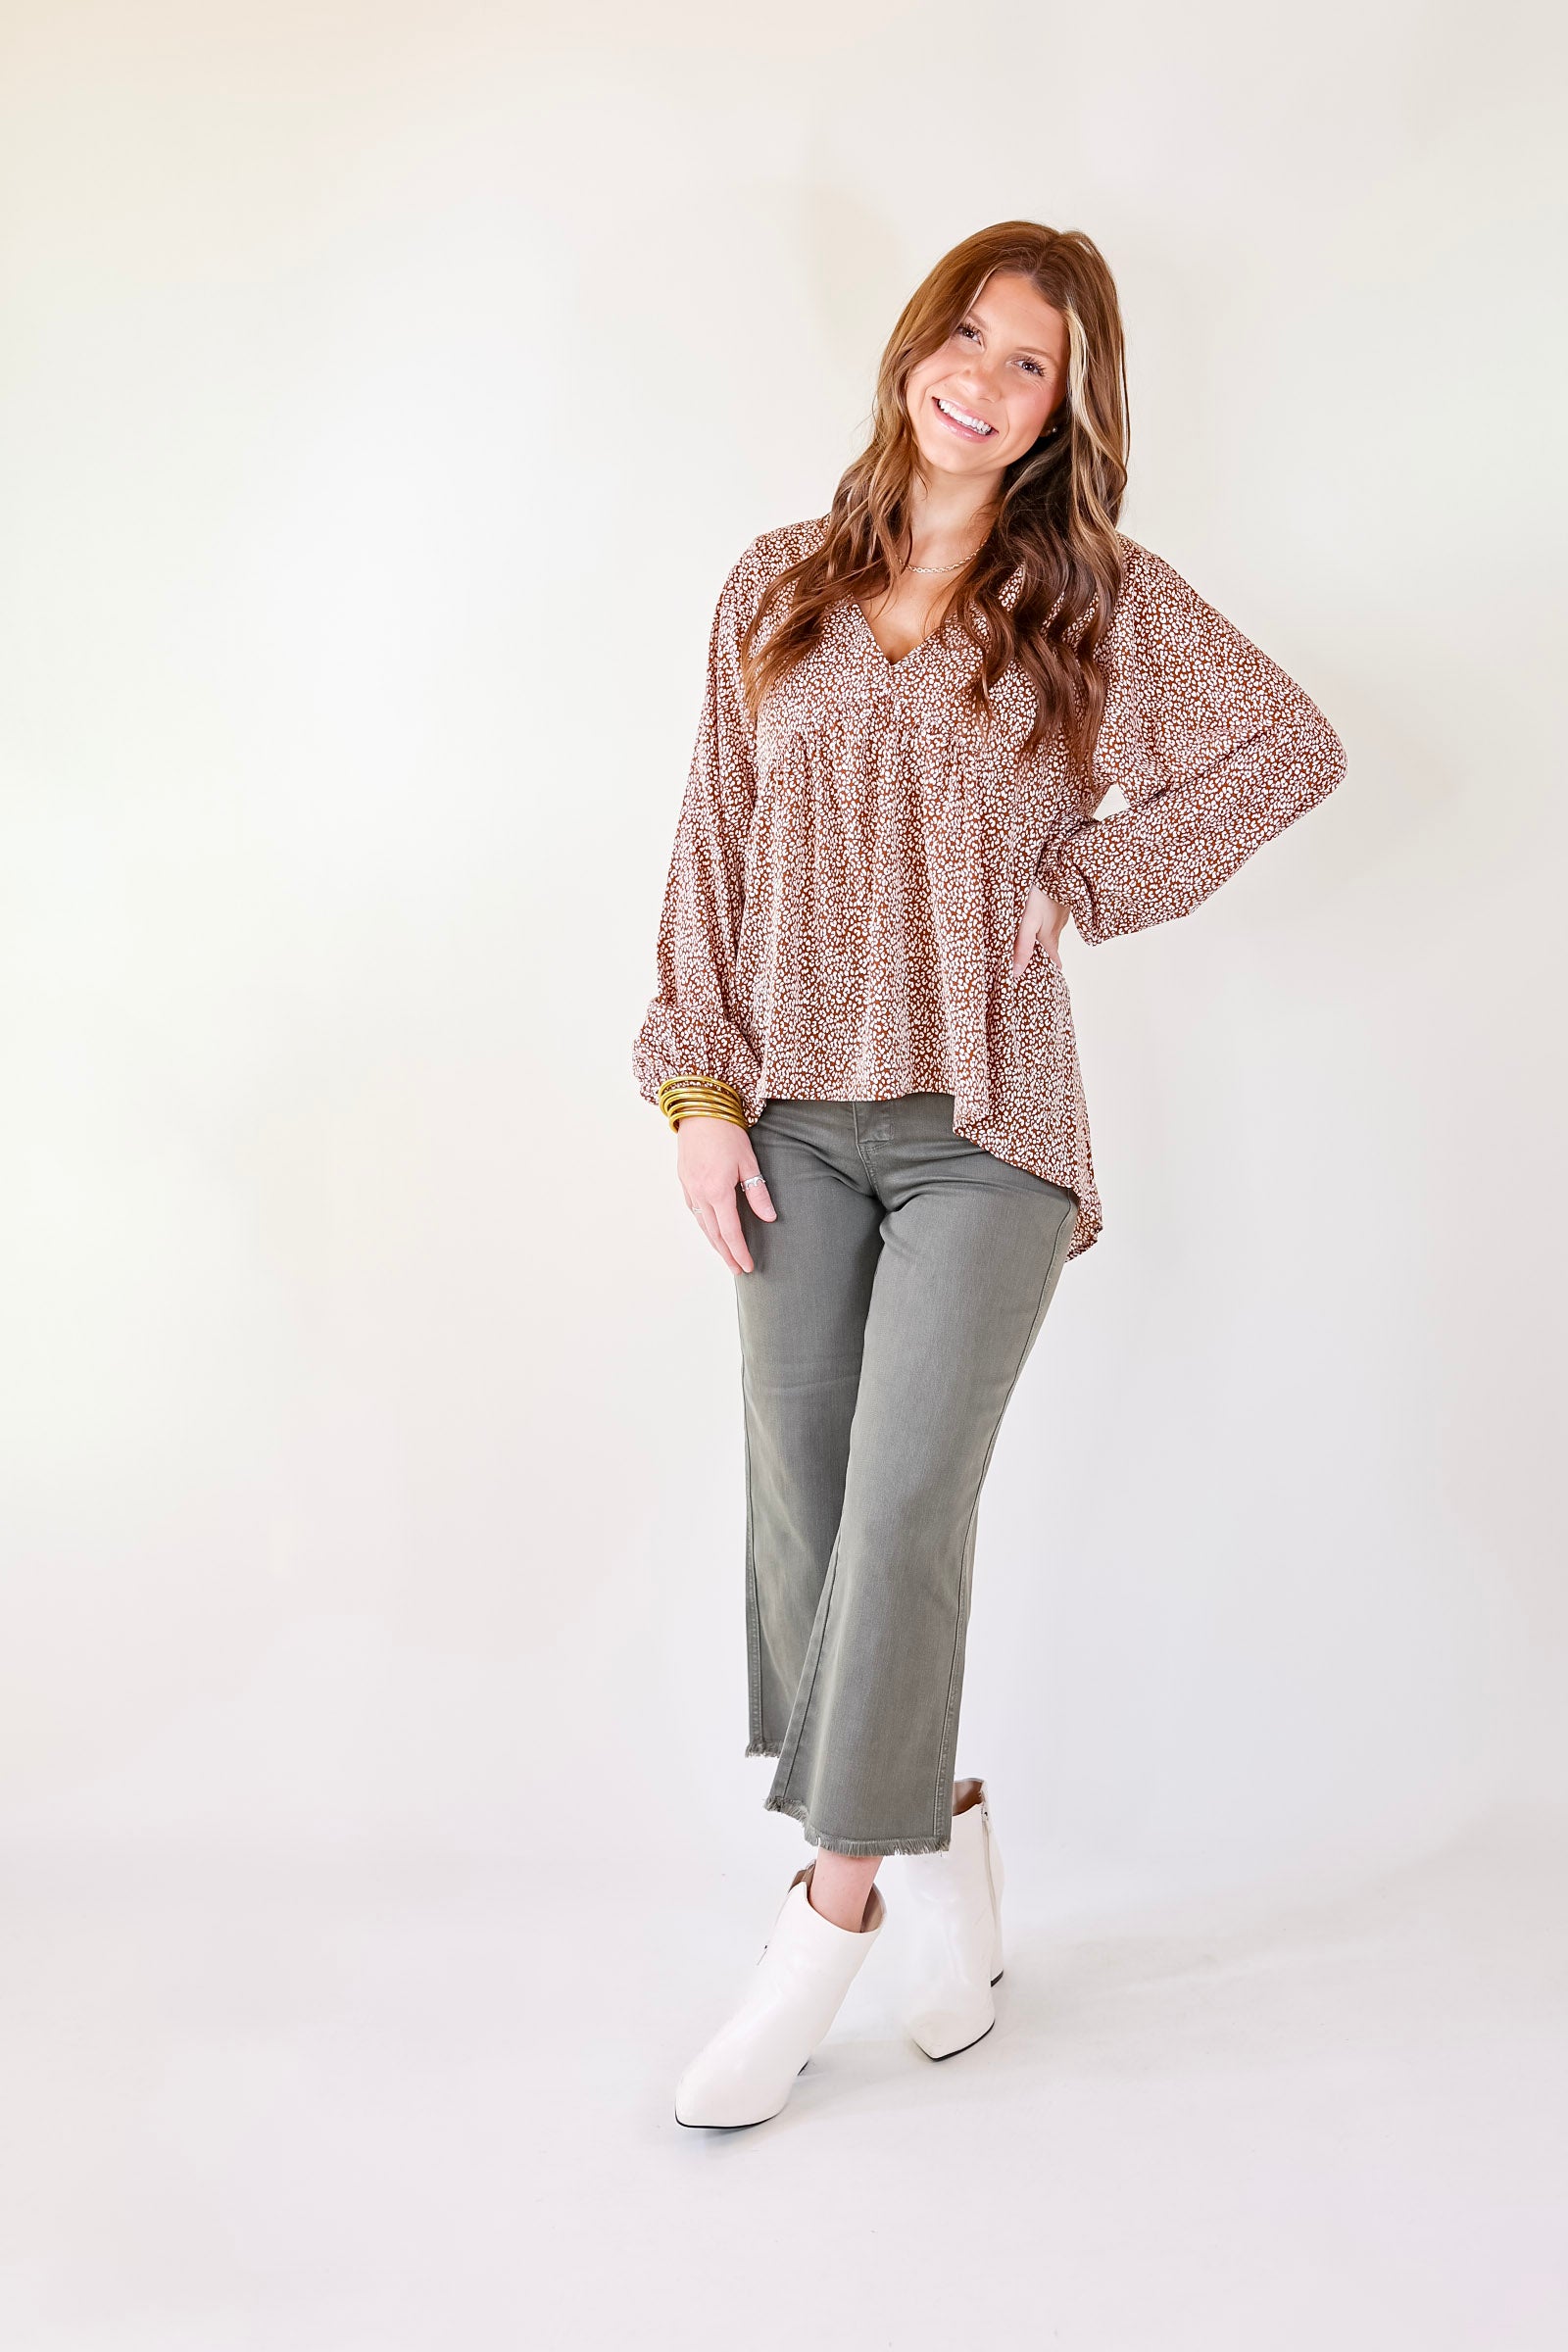 Really Dreamy Small Leopard Print Babydoll Top with Long Sleeves in Brown - Giddy Up Glamour Boutique